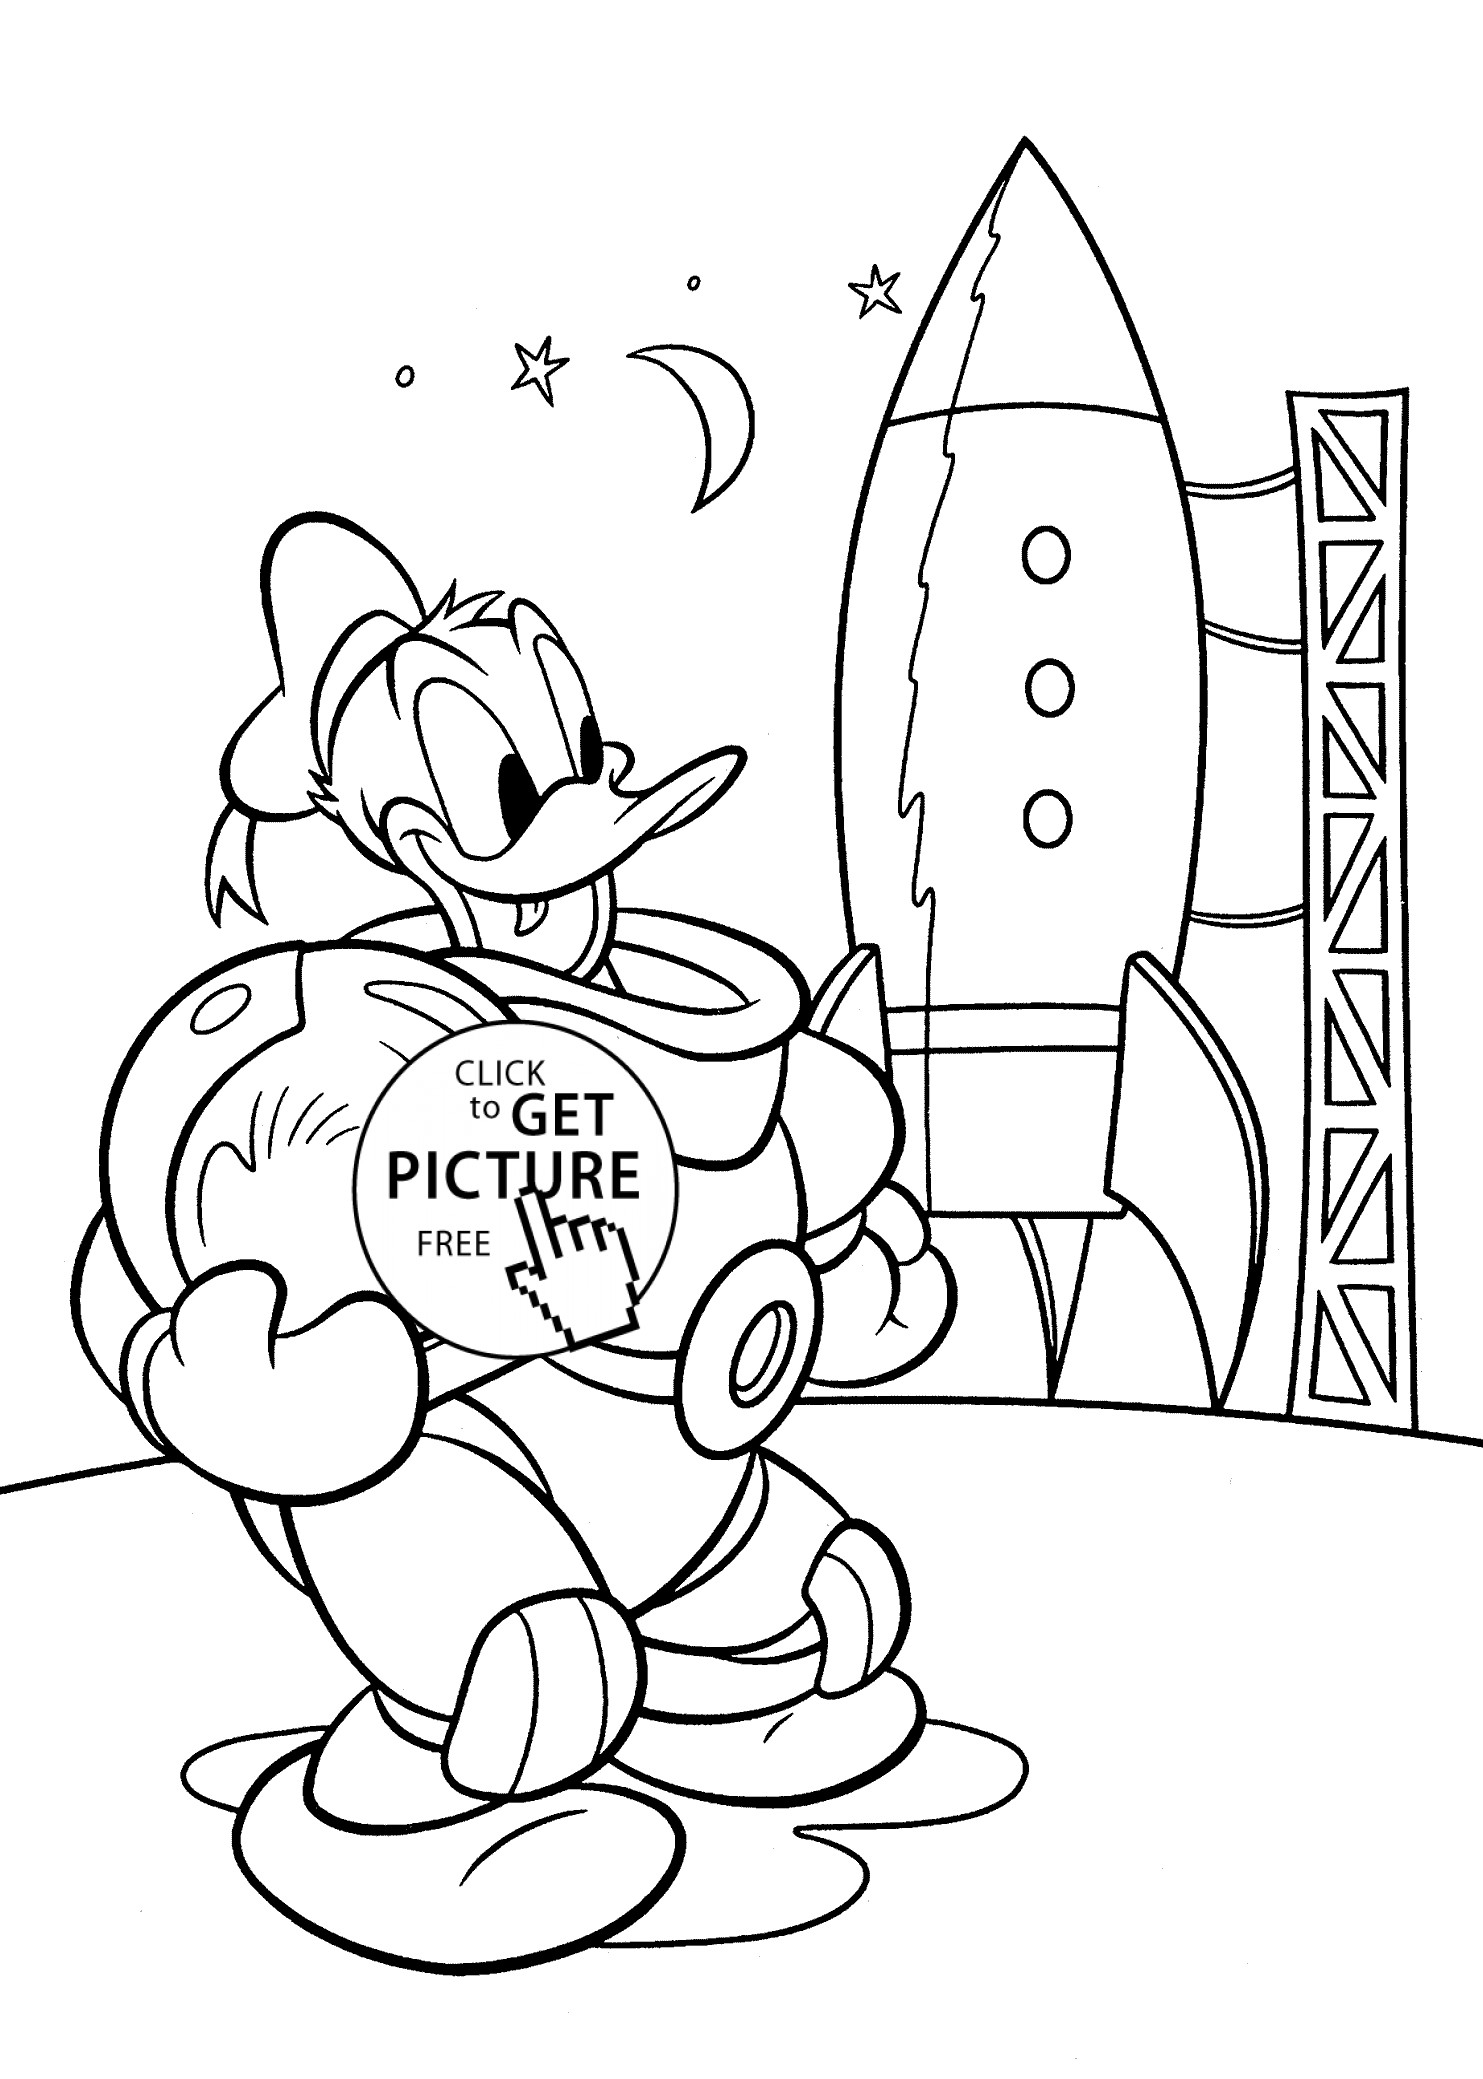 Coloring Printables For Kids
 Donald Duck astronaut coloring pages for kids printable